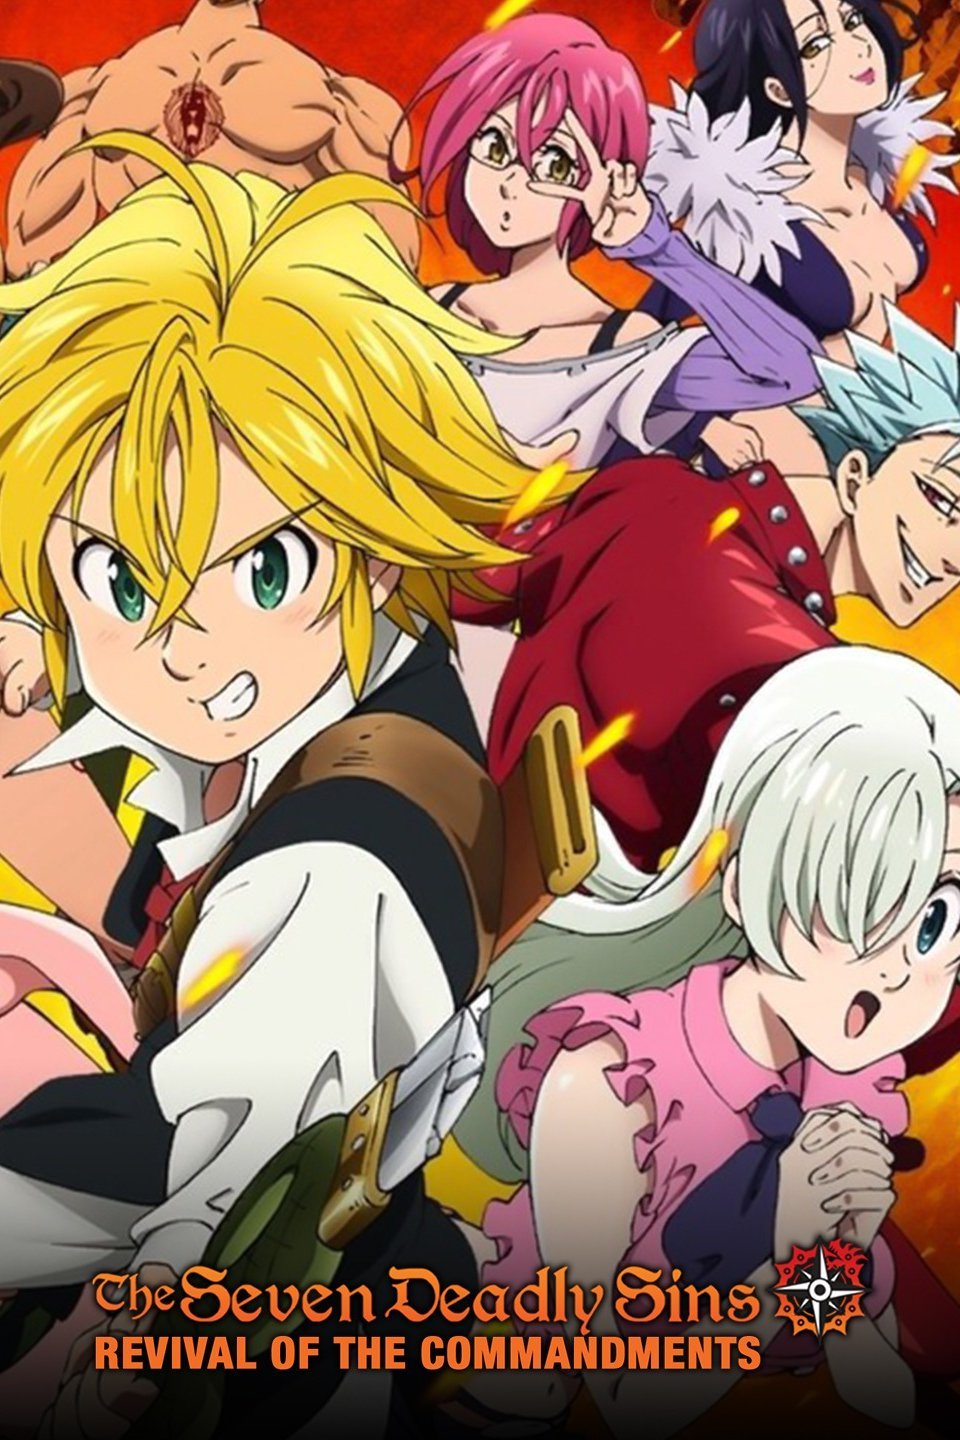 The Seven Deadly Sins: Revival of the Commandments - Rotten Tomatoes